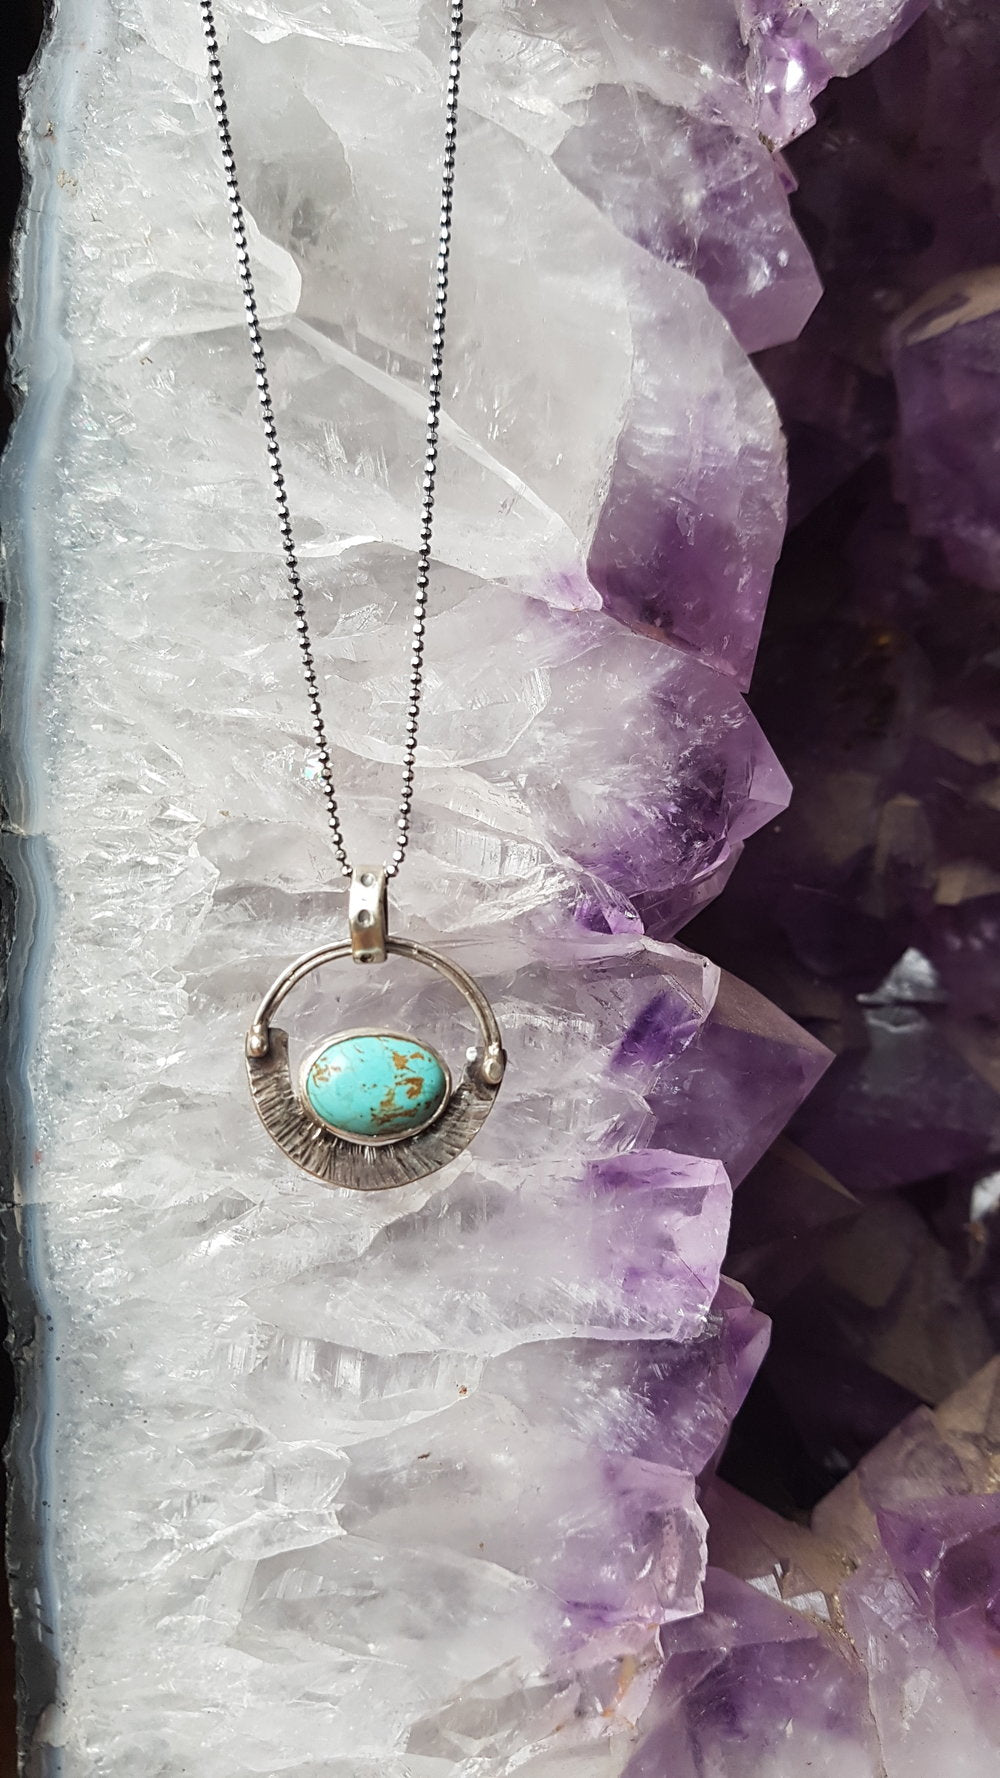 Turquoise and Sterling Silver Pendant Necklace